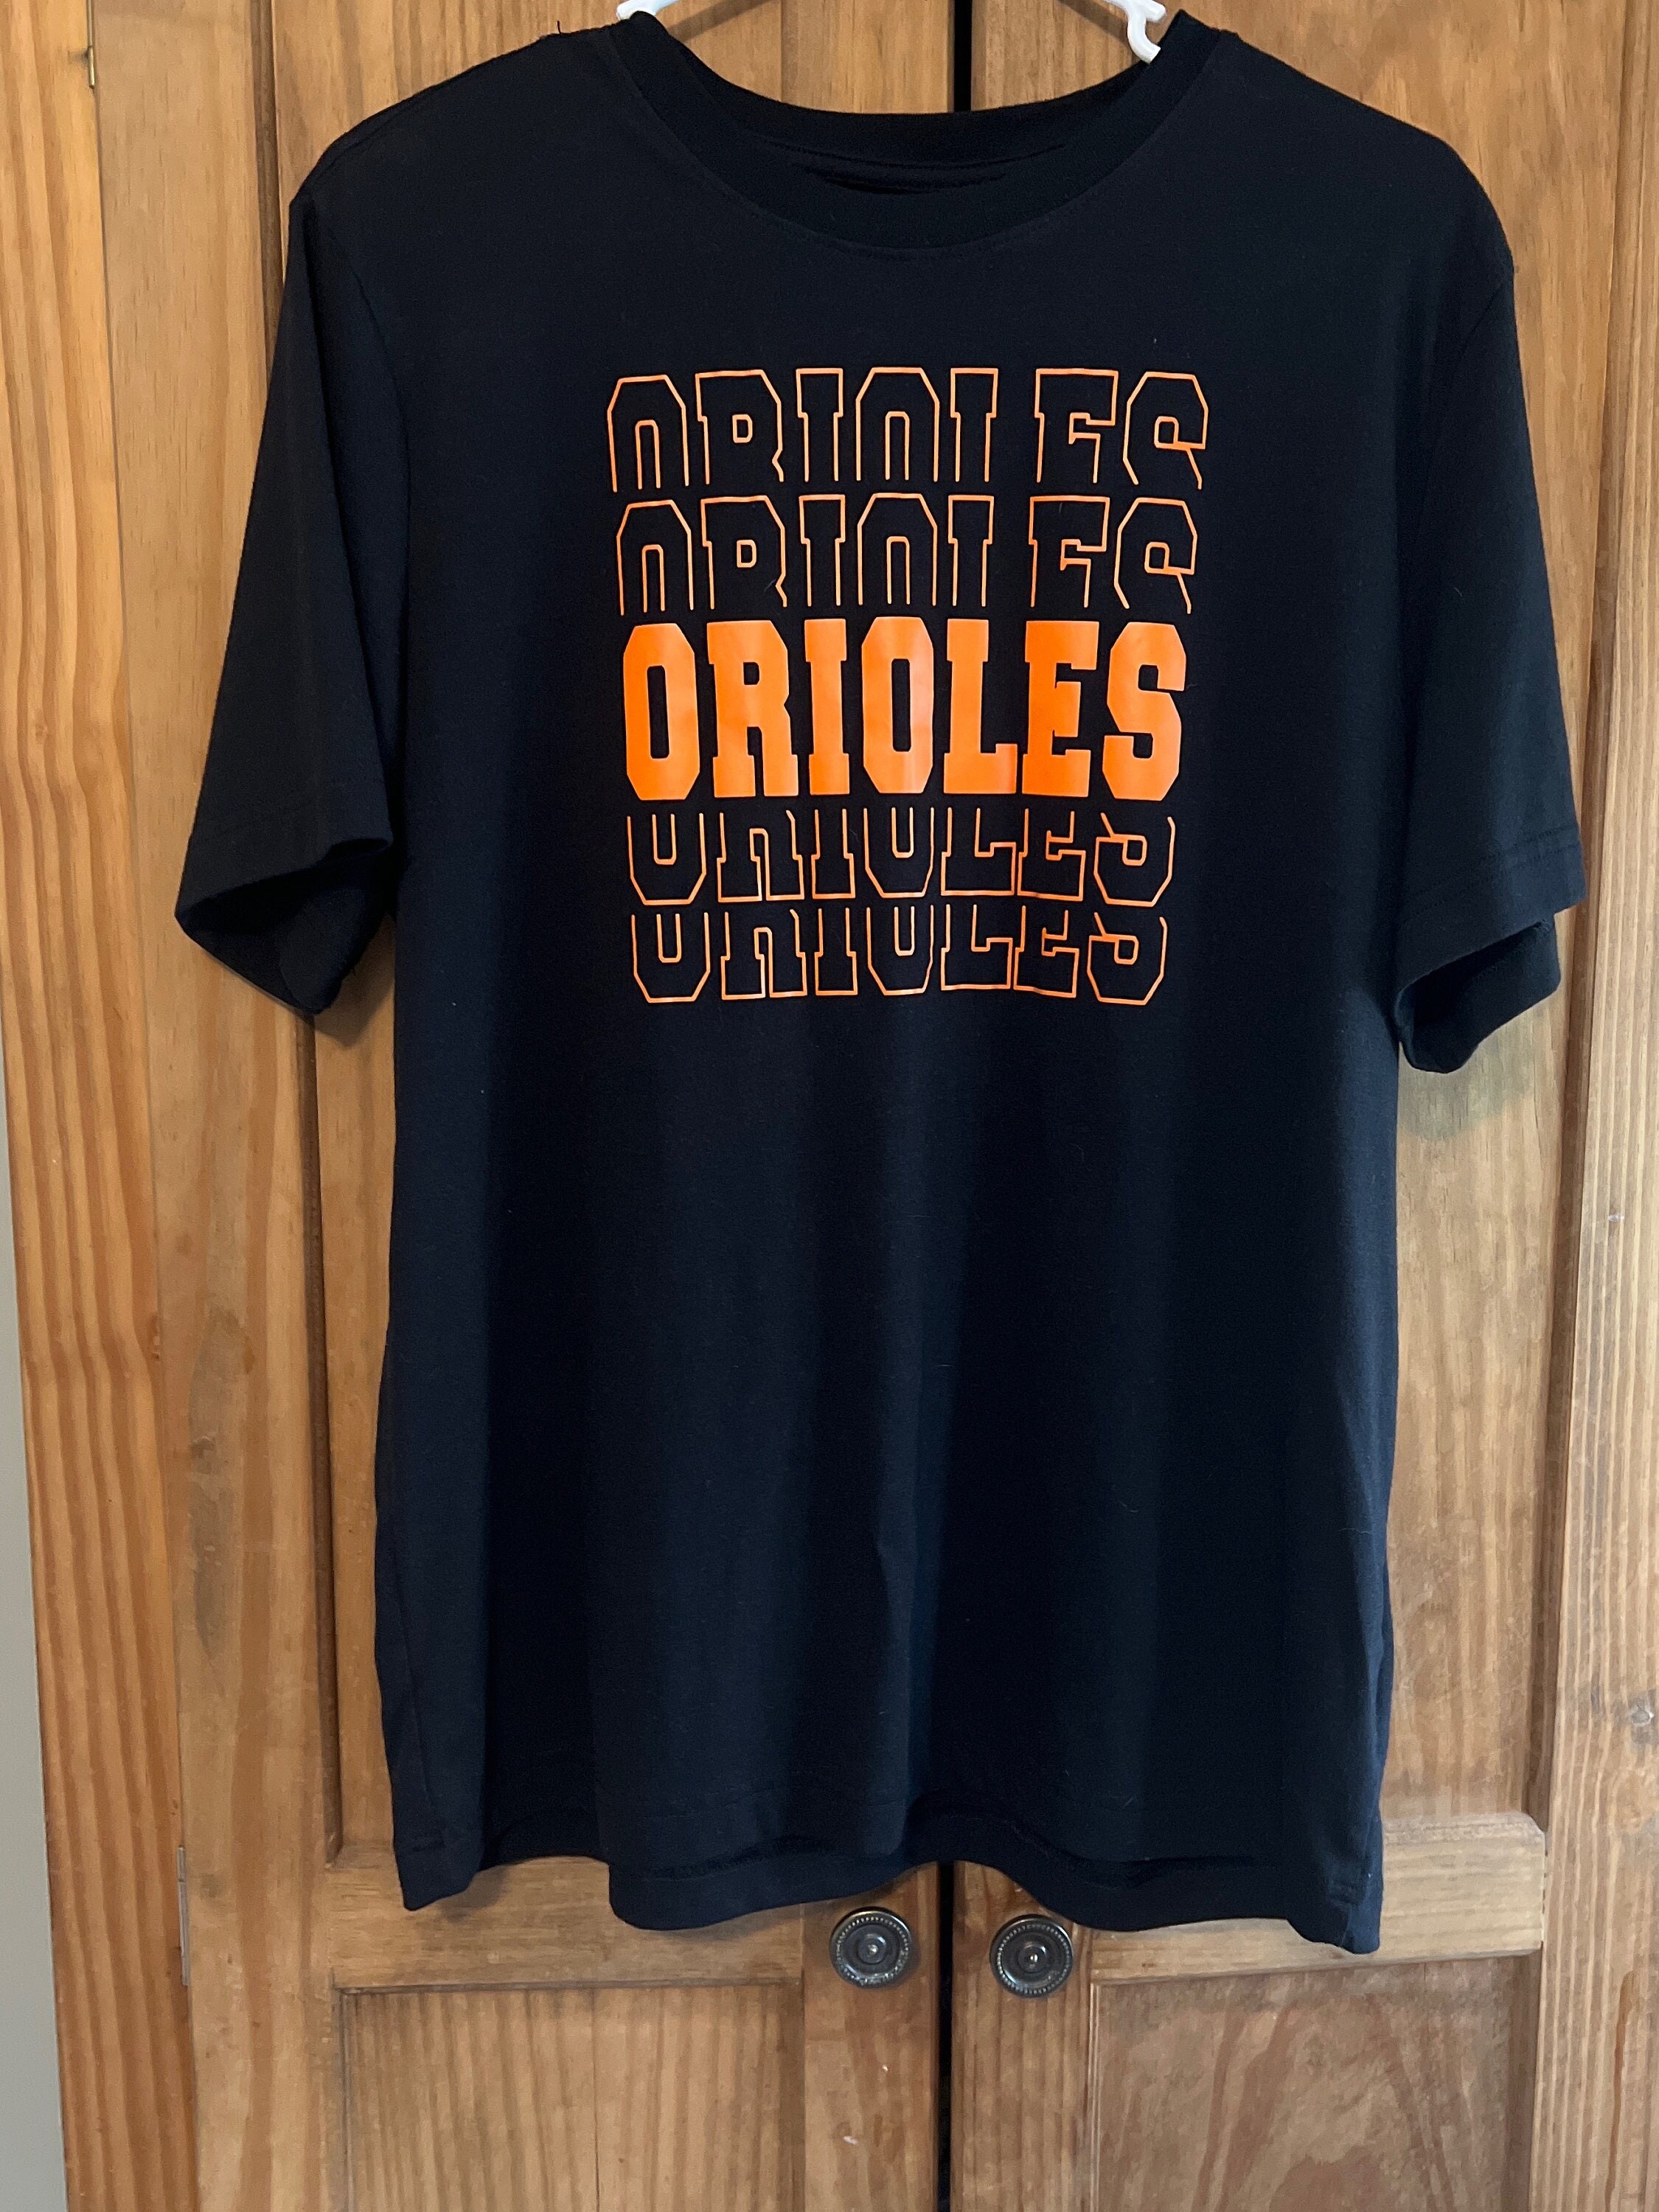 Delta, Shirts, Baltimore Ravens X Orioles Nfl Mlb Vintage 9s Style Graphic  Tee T Shirt Large